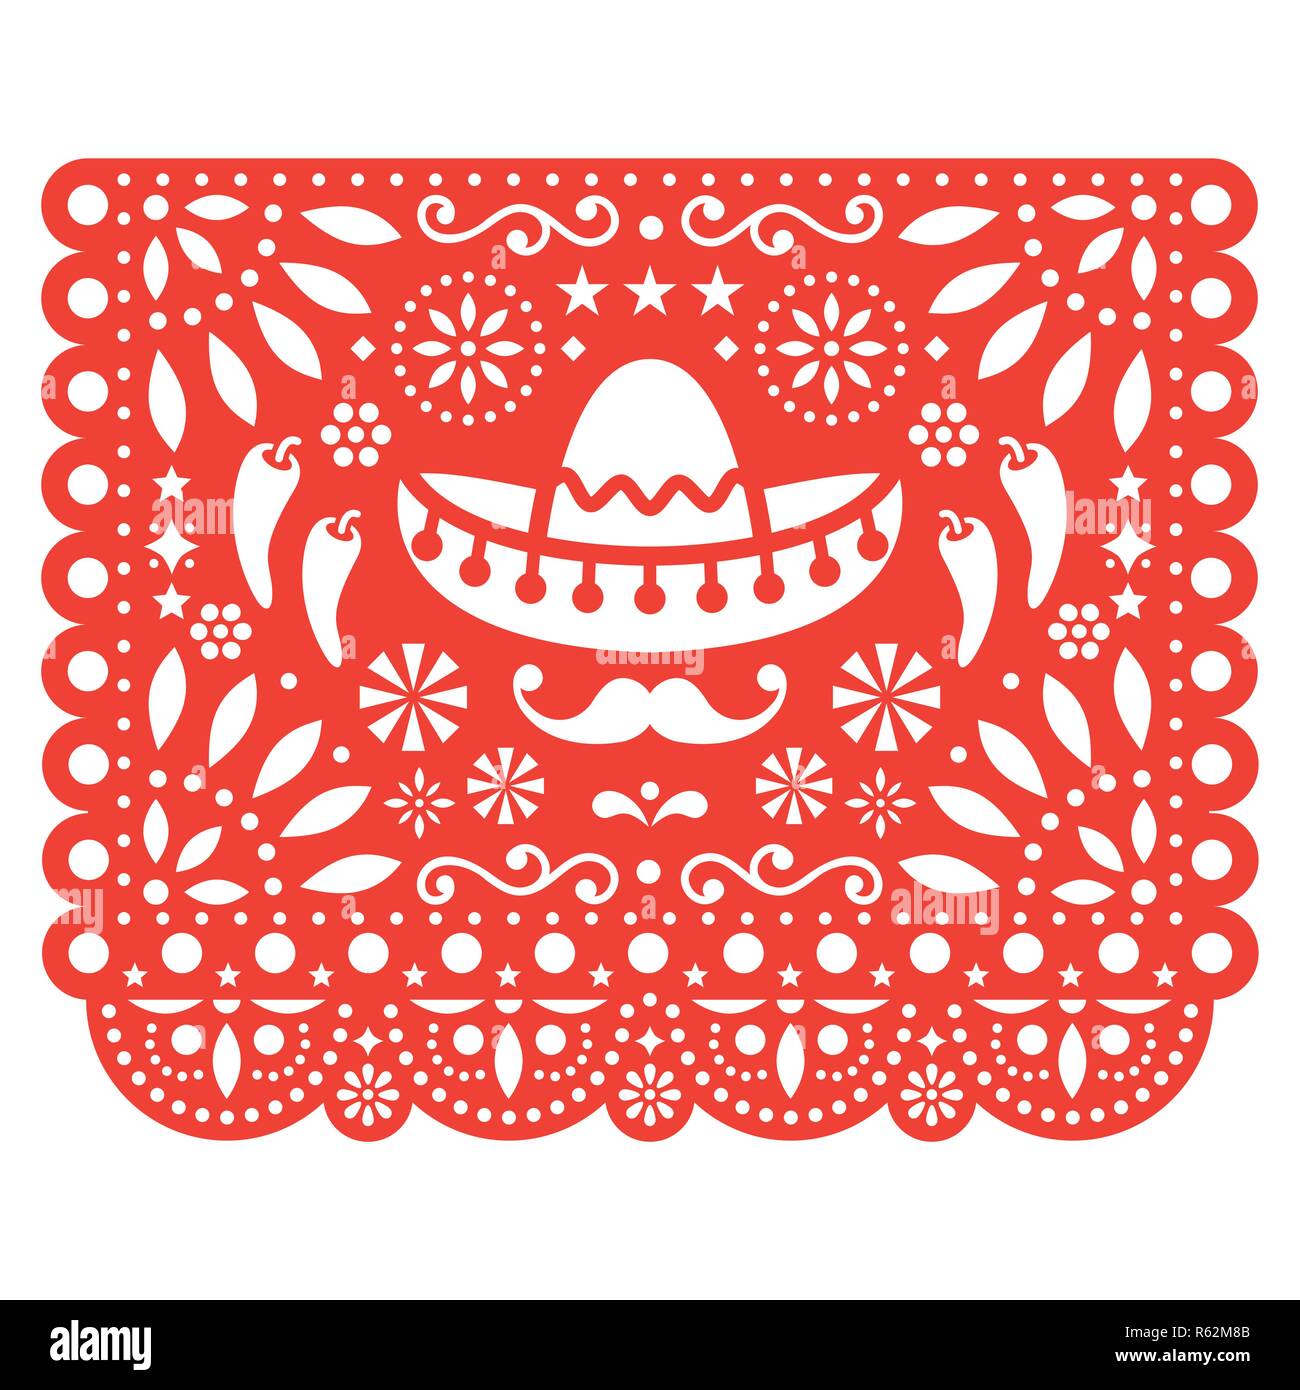 Folk art, retro ornament form Mexico, cut out composition with flowers and abstract shapes isolated on white Stock Vector